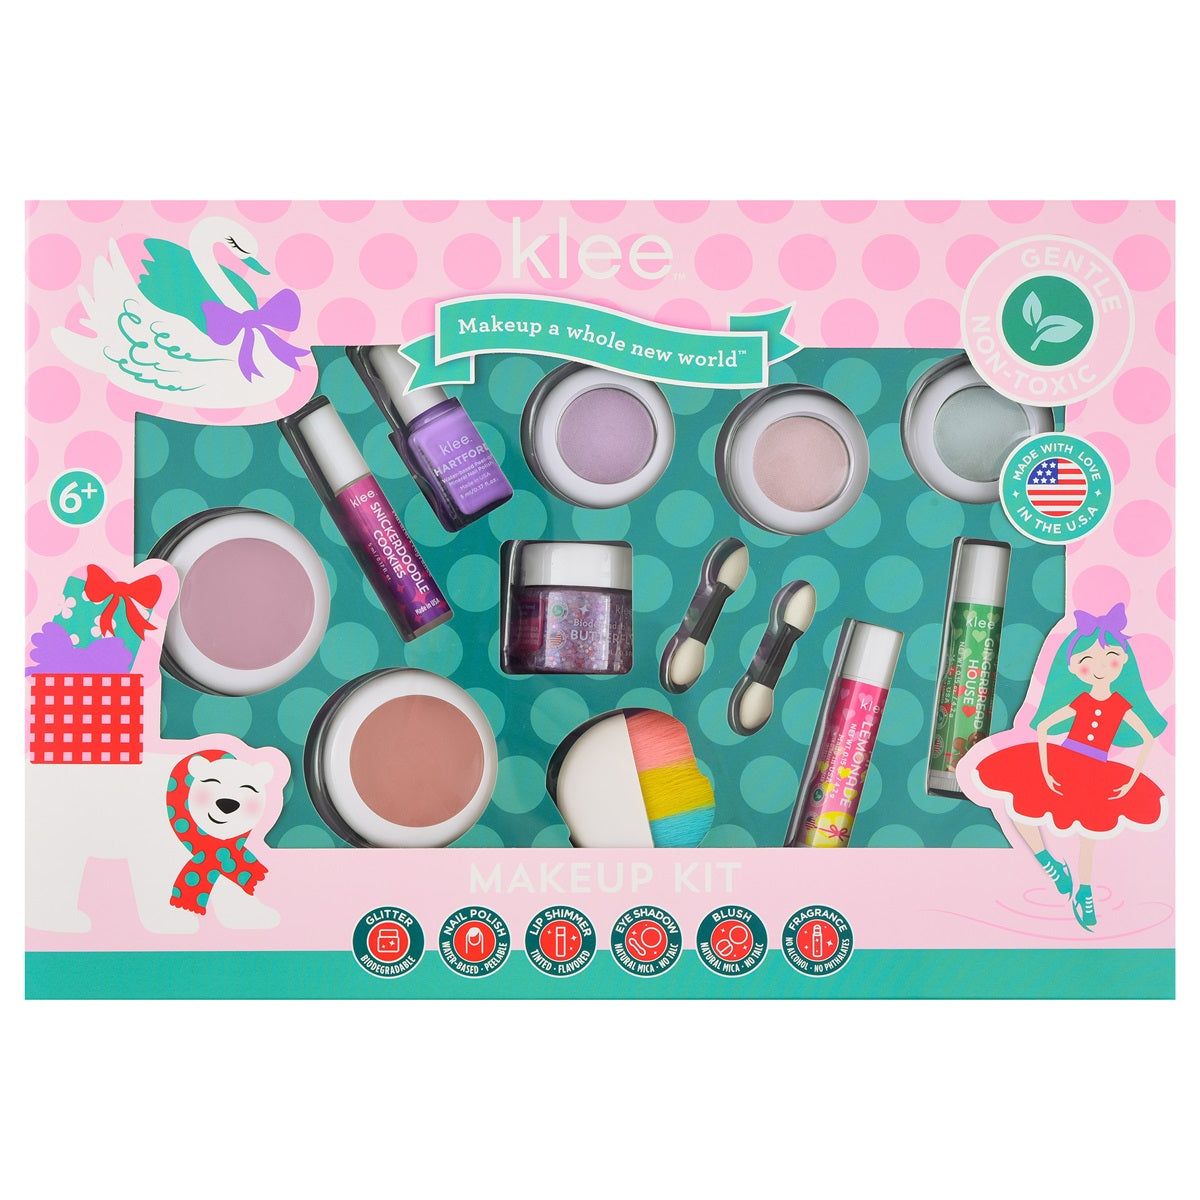 Klee Naturals - Xmas Edition - Natural Mineral Ultra Deluxe Makeup Kit 聖誕版 - 極致華麗彩妝香水組合10件組合 (Bliss Abound)